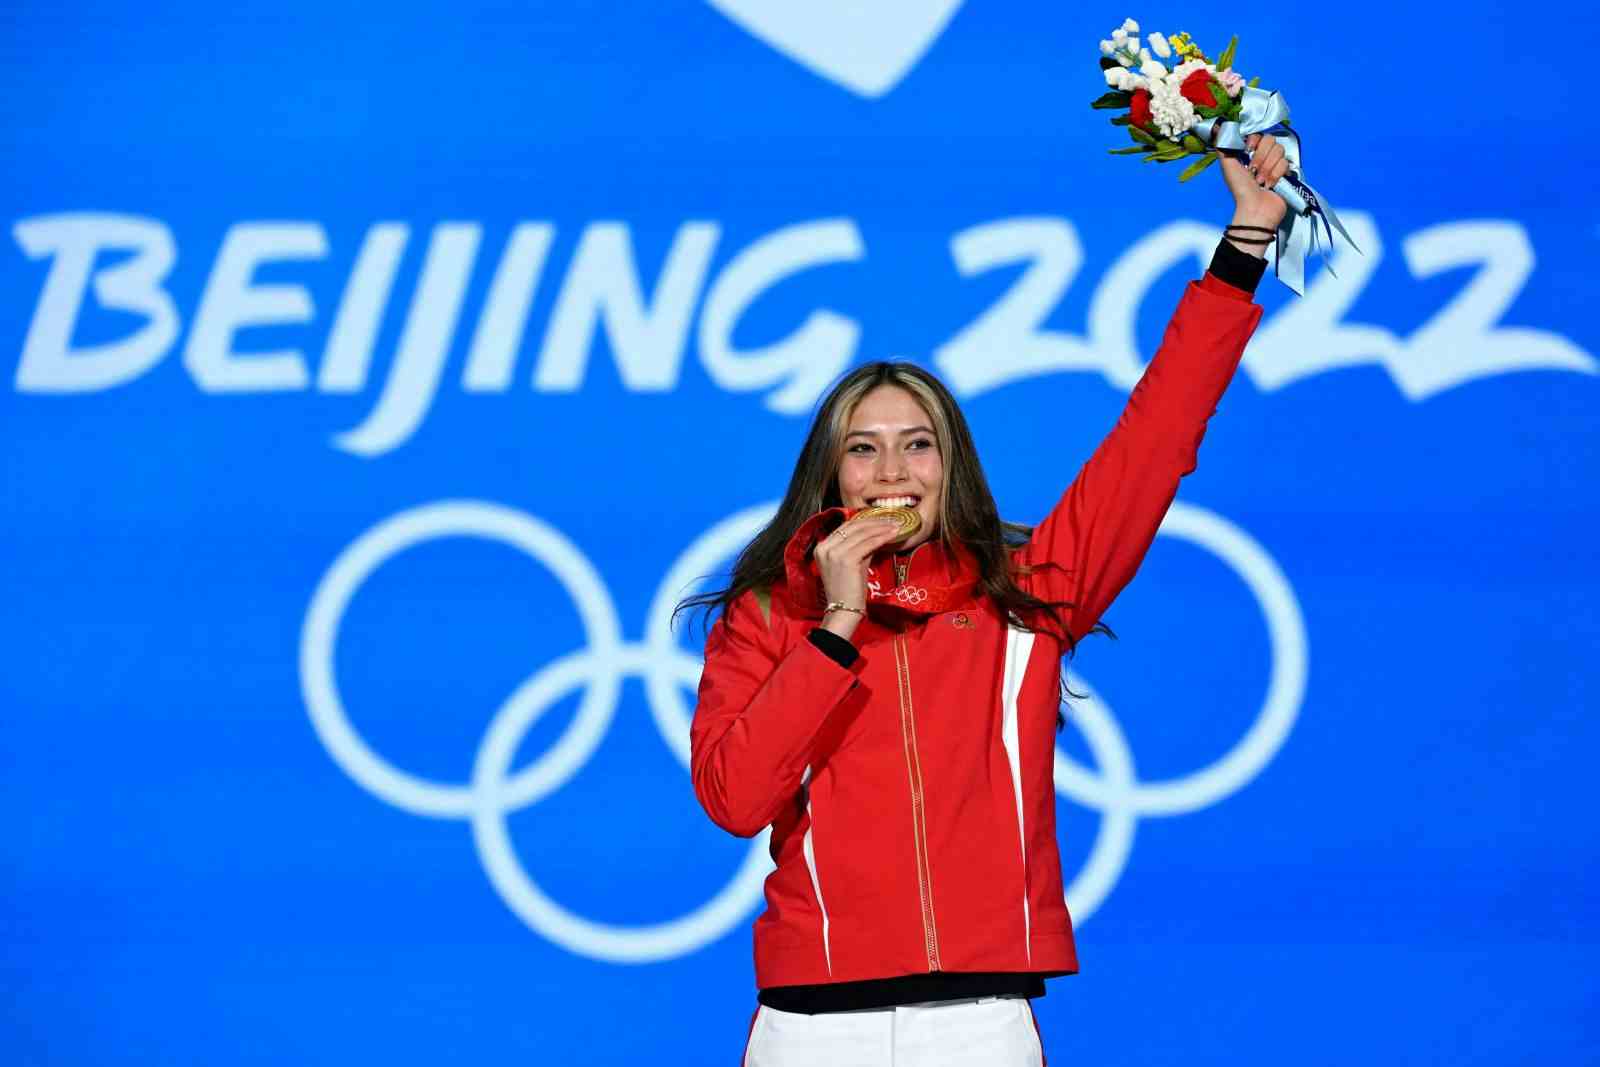 Gold medalist Eileen (Ailing) Gu of China celebrates her women's big air victory at the Beijing Medals Plaza in Beijing on February 8, 2022. (MANAN VATSYAYANA/AFP via Getty Images)